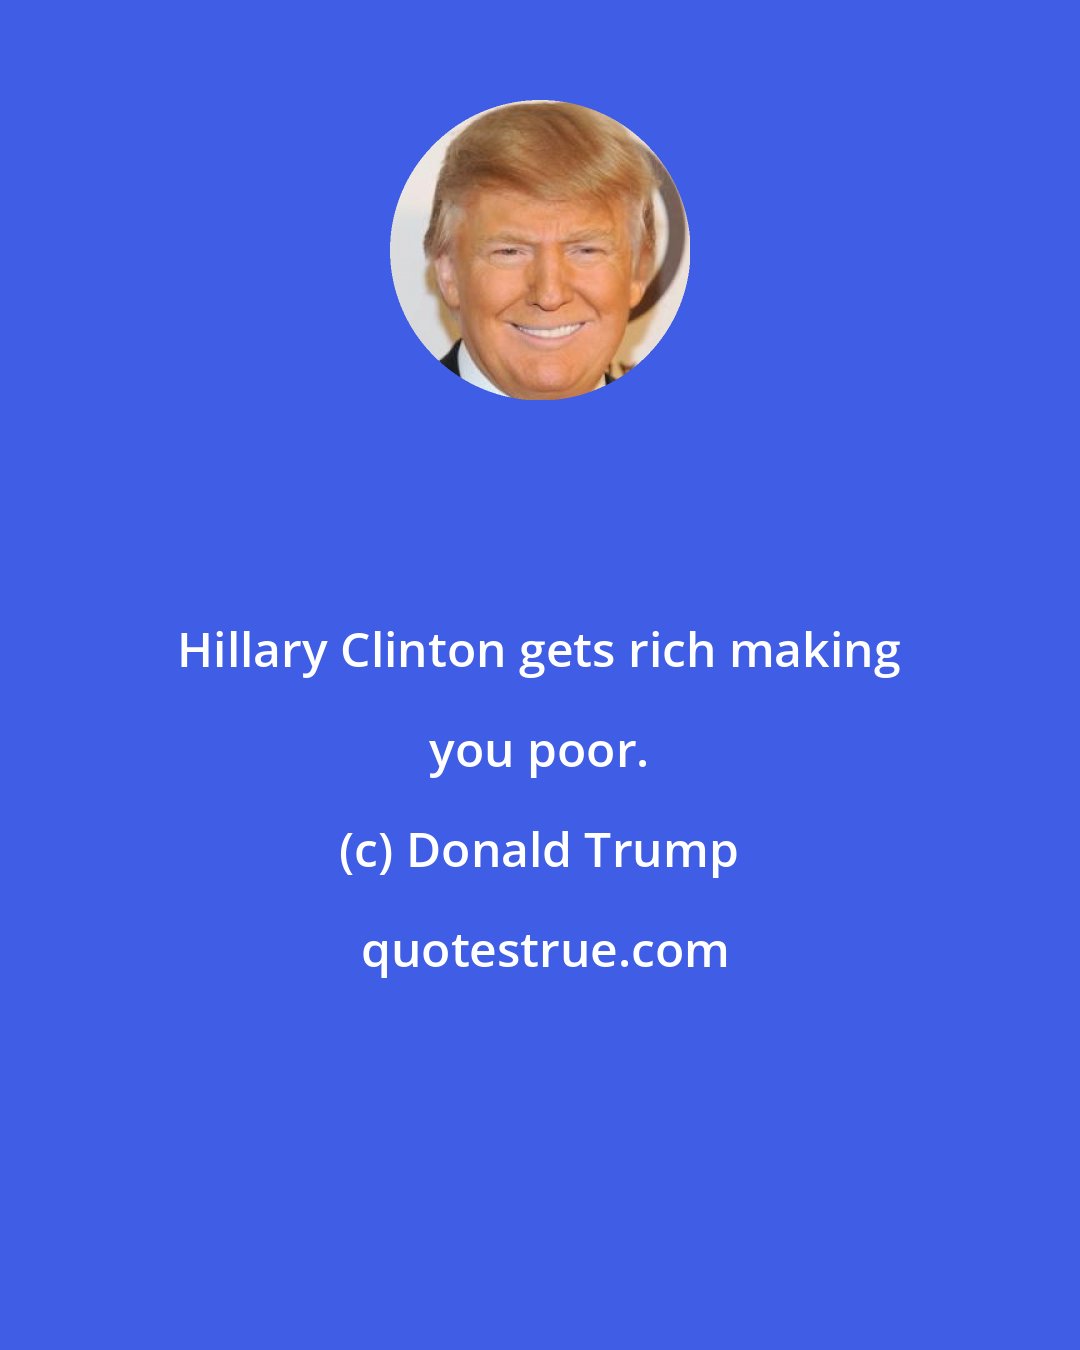 Donald Trump: Hillary Clinton gets rich making you poor.